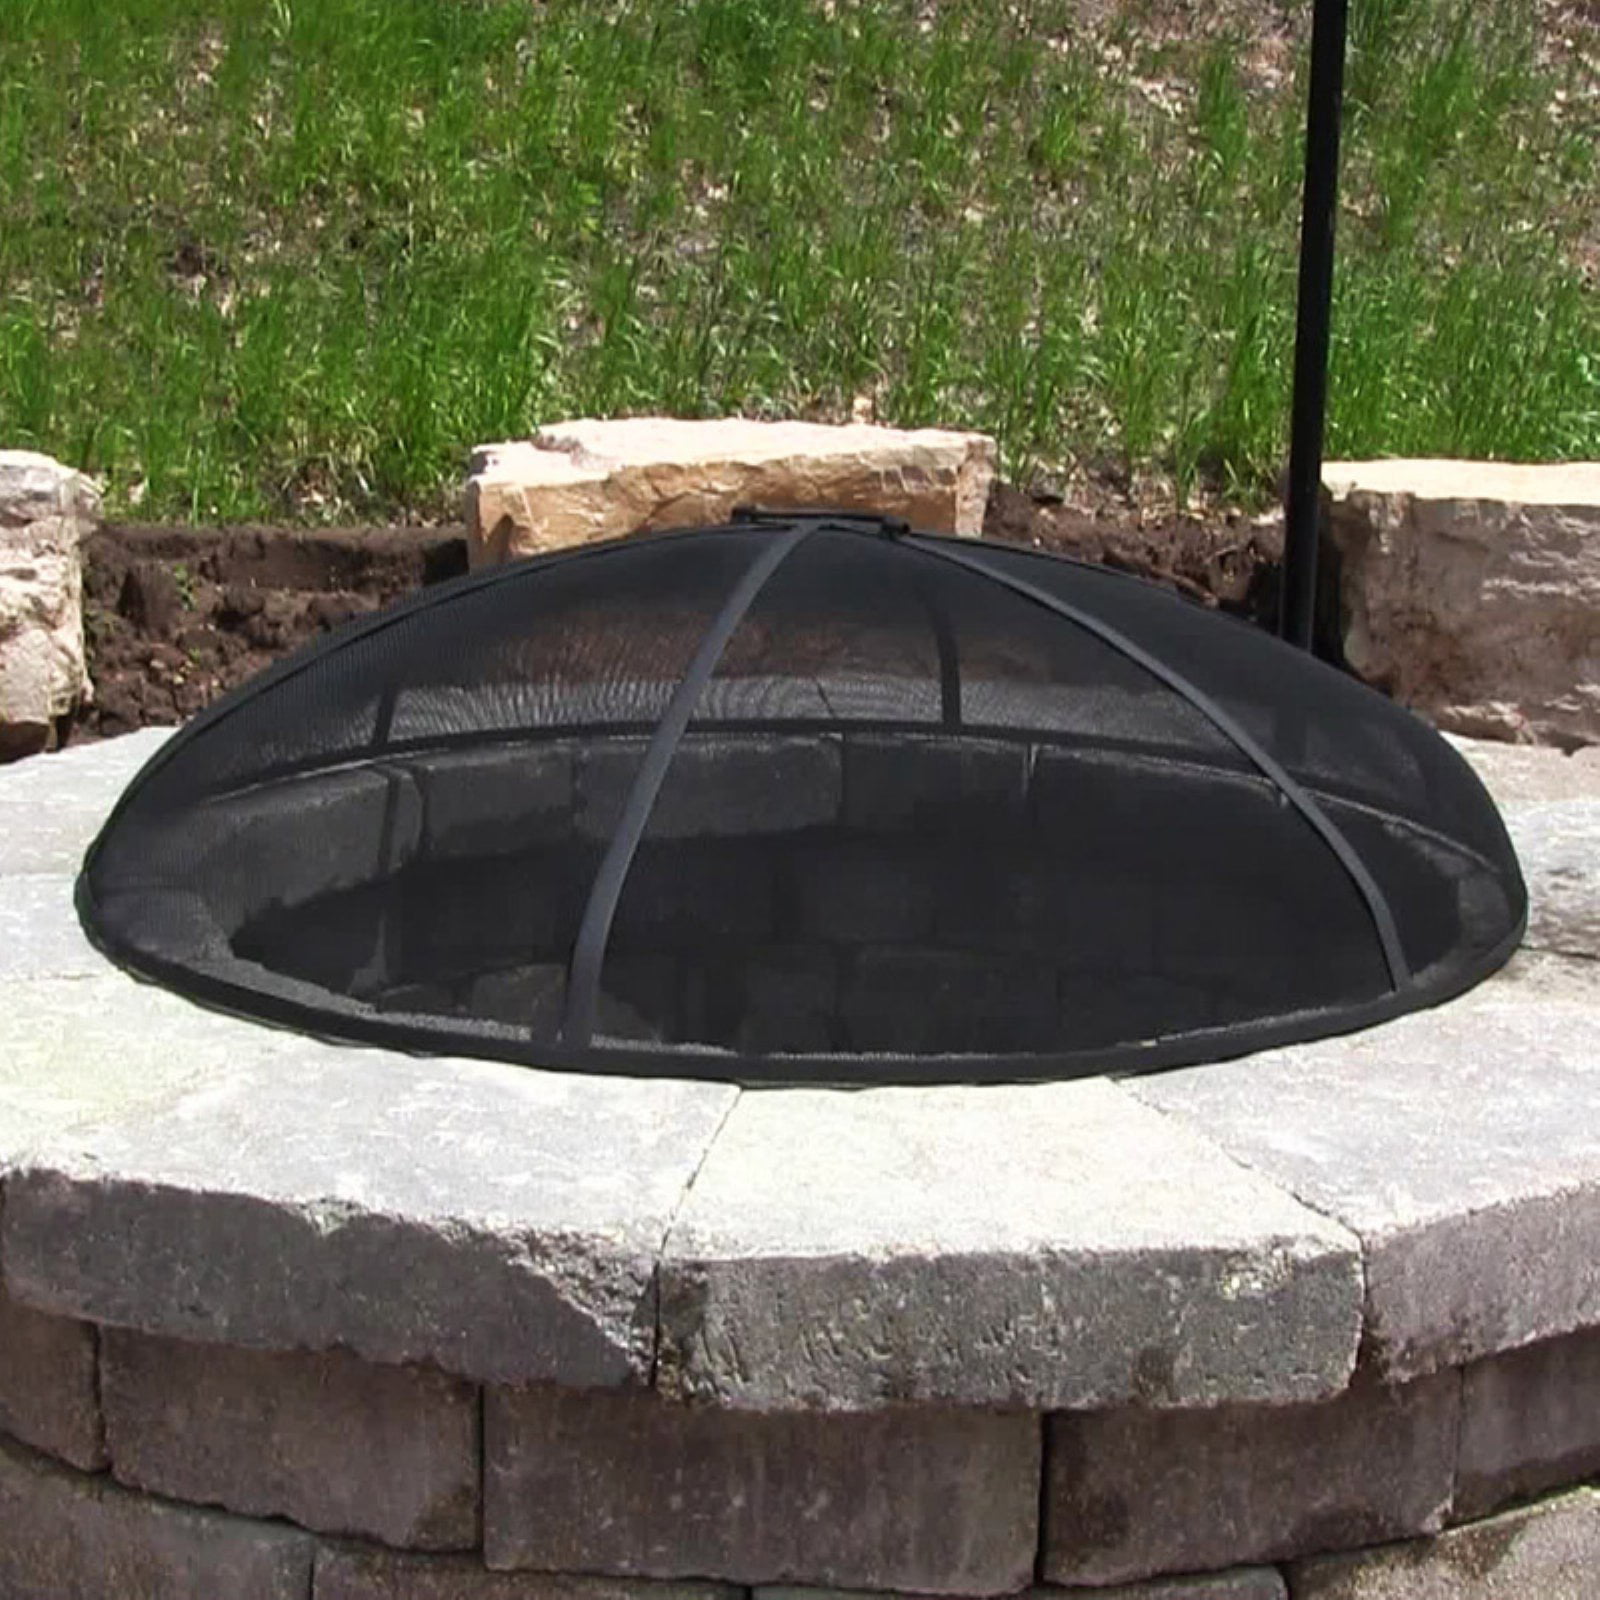 Heavy Duty Fire Pit Spark Screen, How To Build A Fire Pit Screen Cover